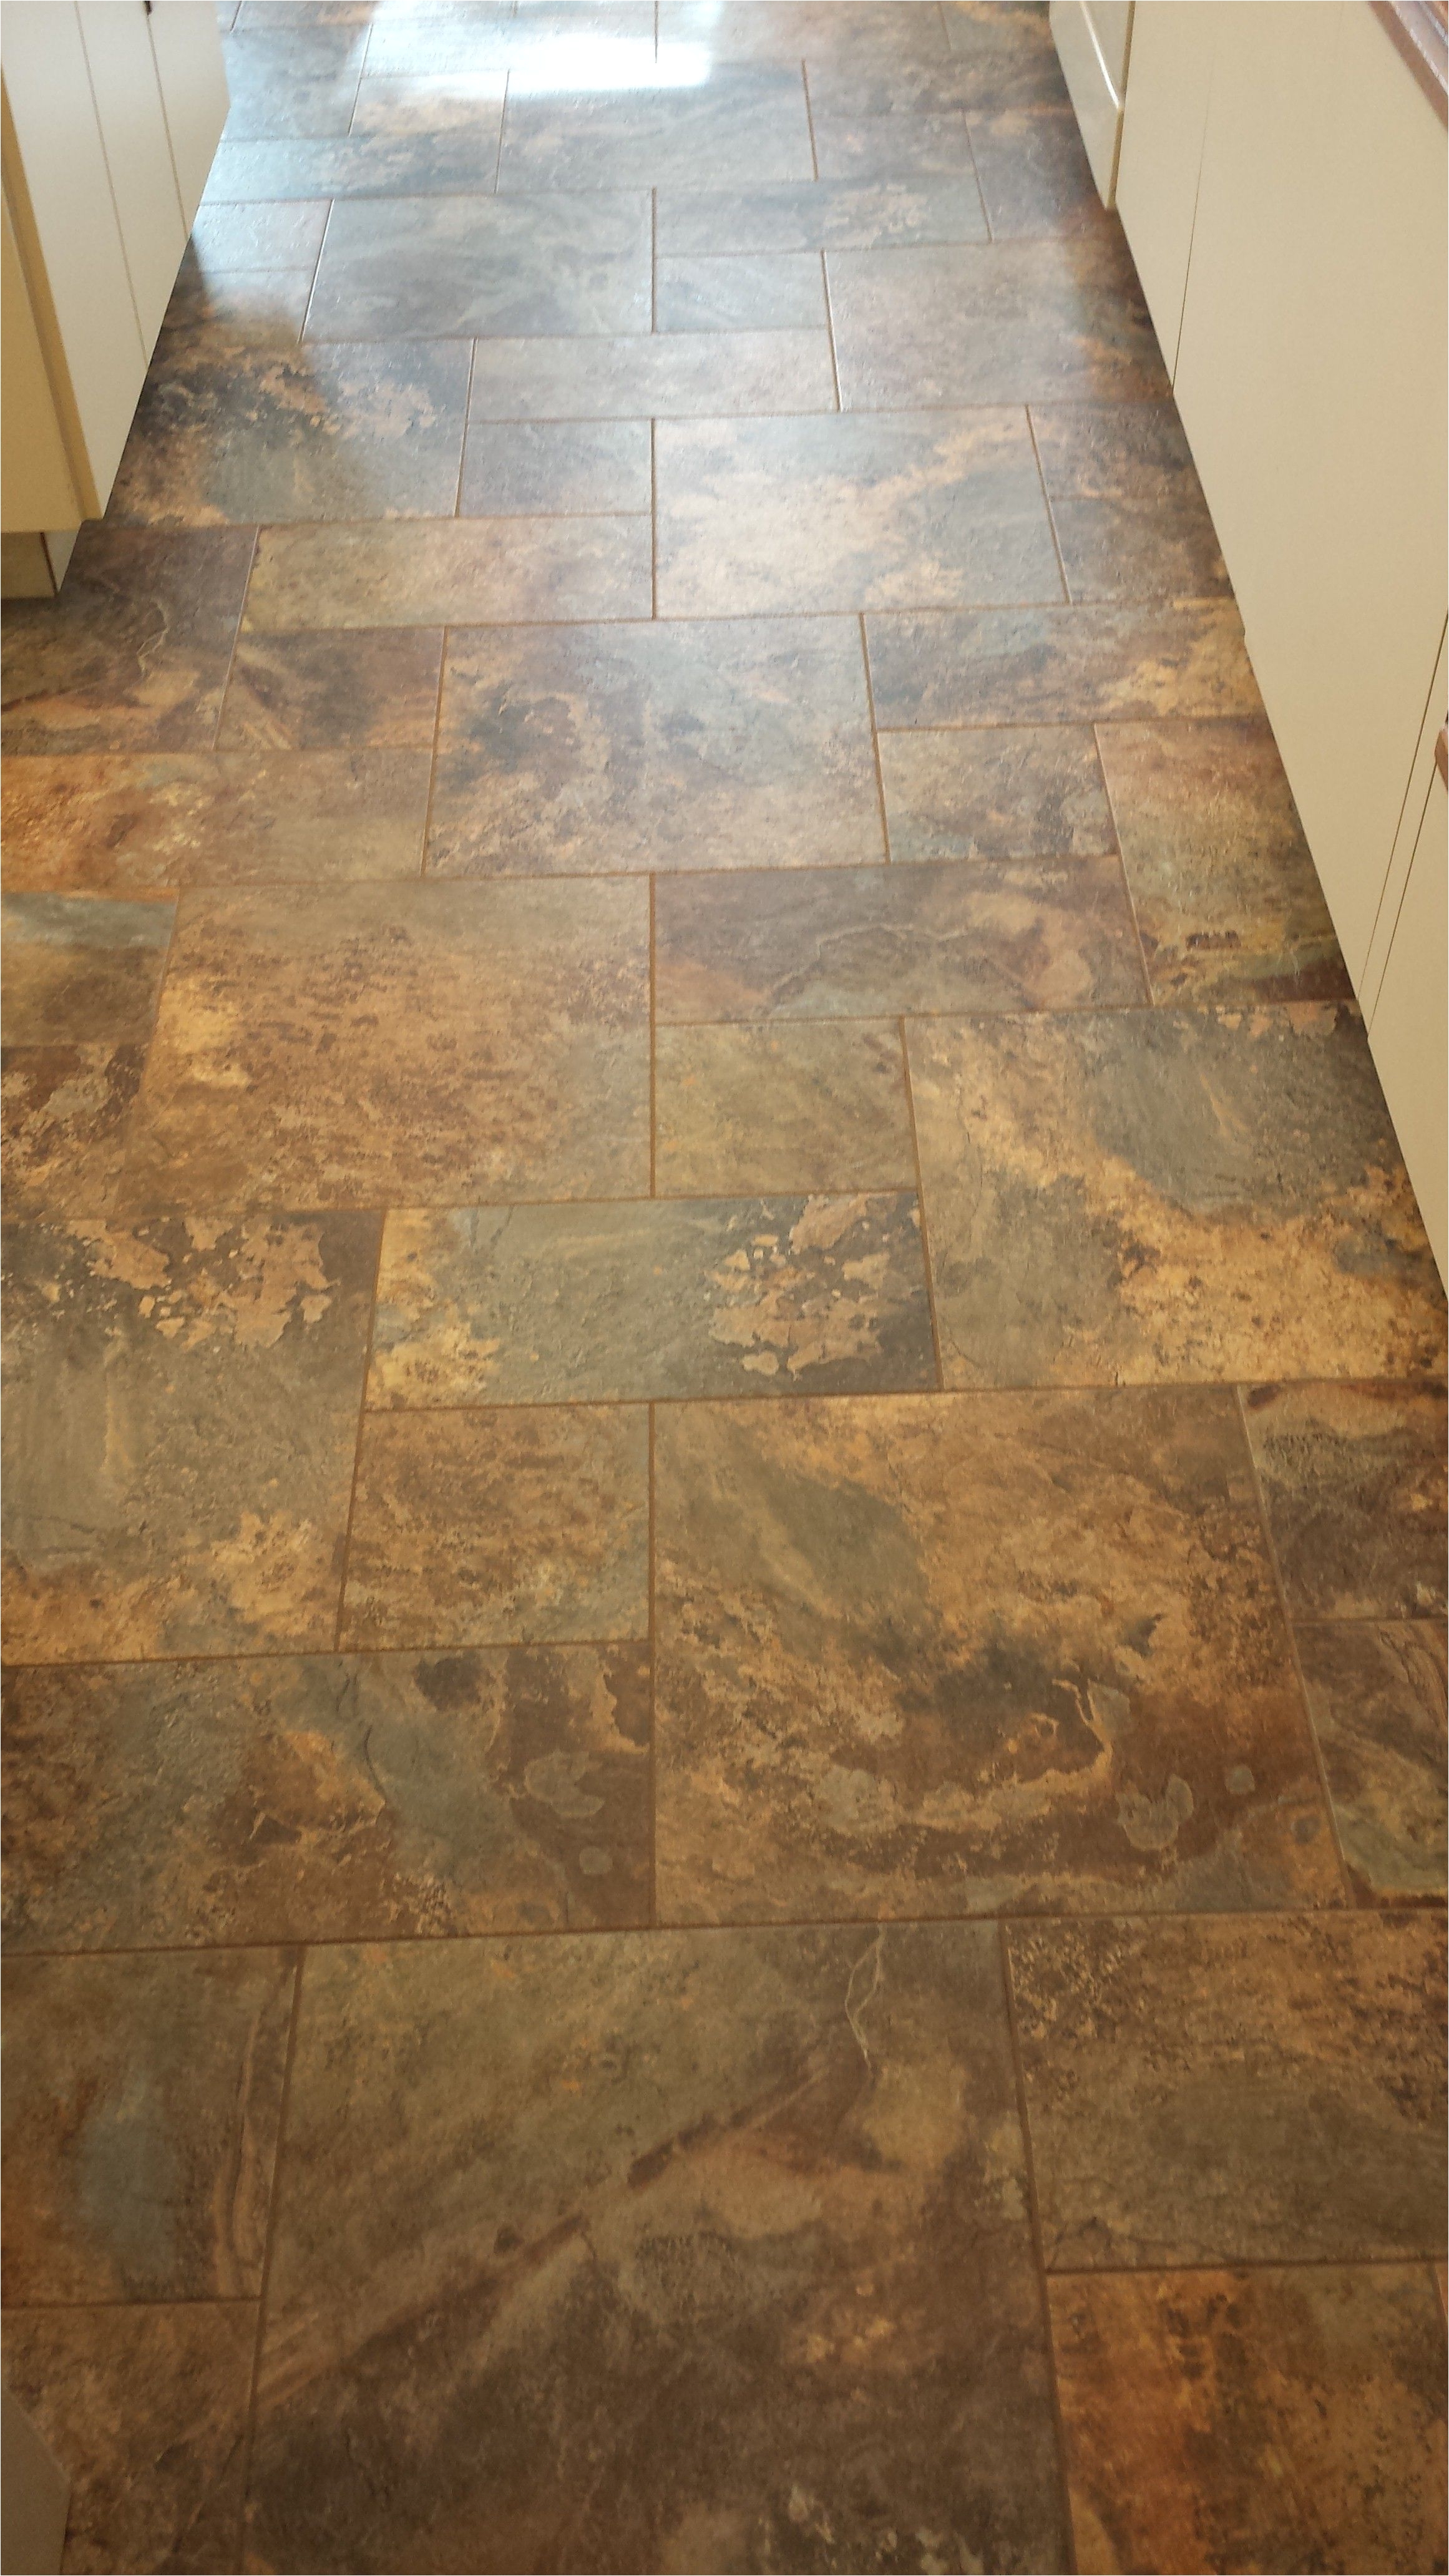 this is a modular vinyl tile from armstrong alterna the cobblestone pattern used 3 sizes to give this old world look very easy to maintain just mop like